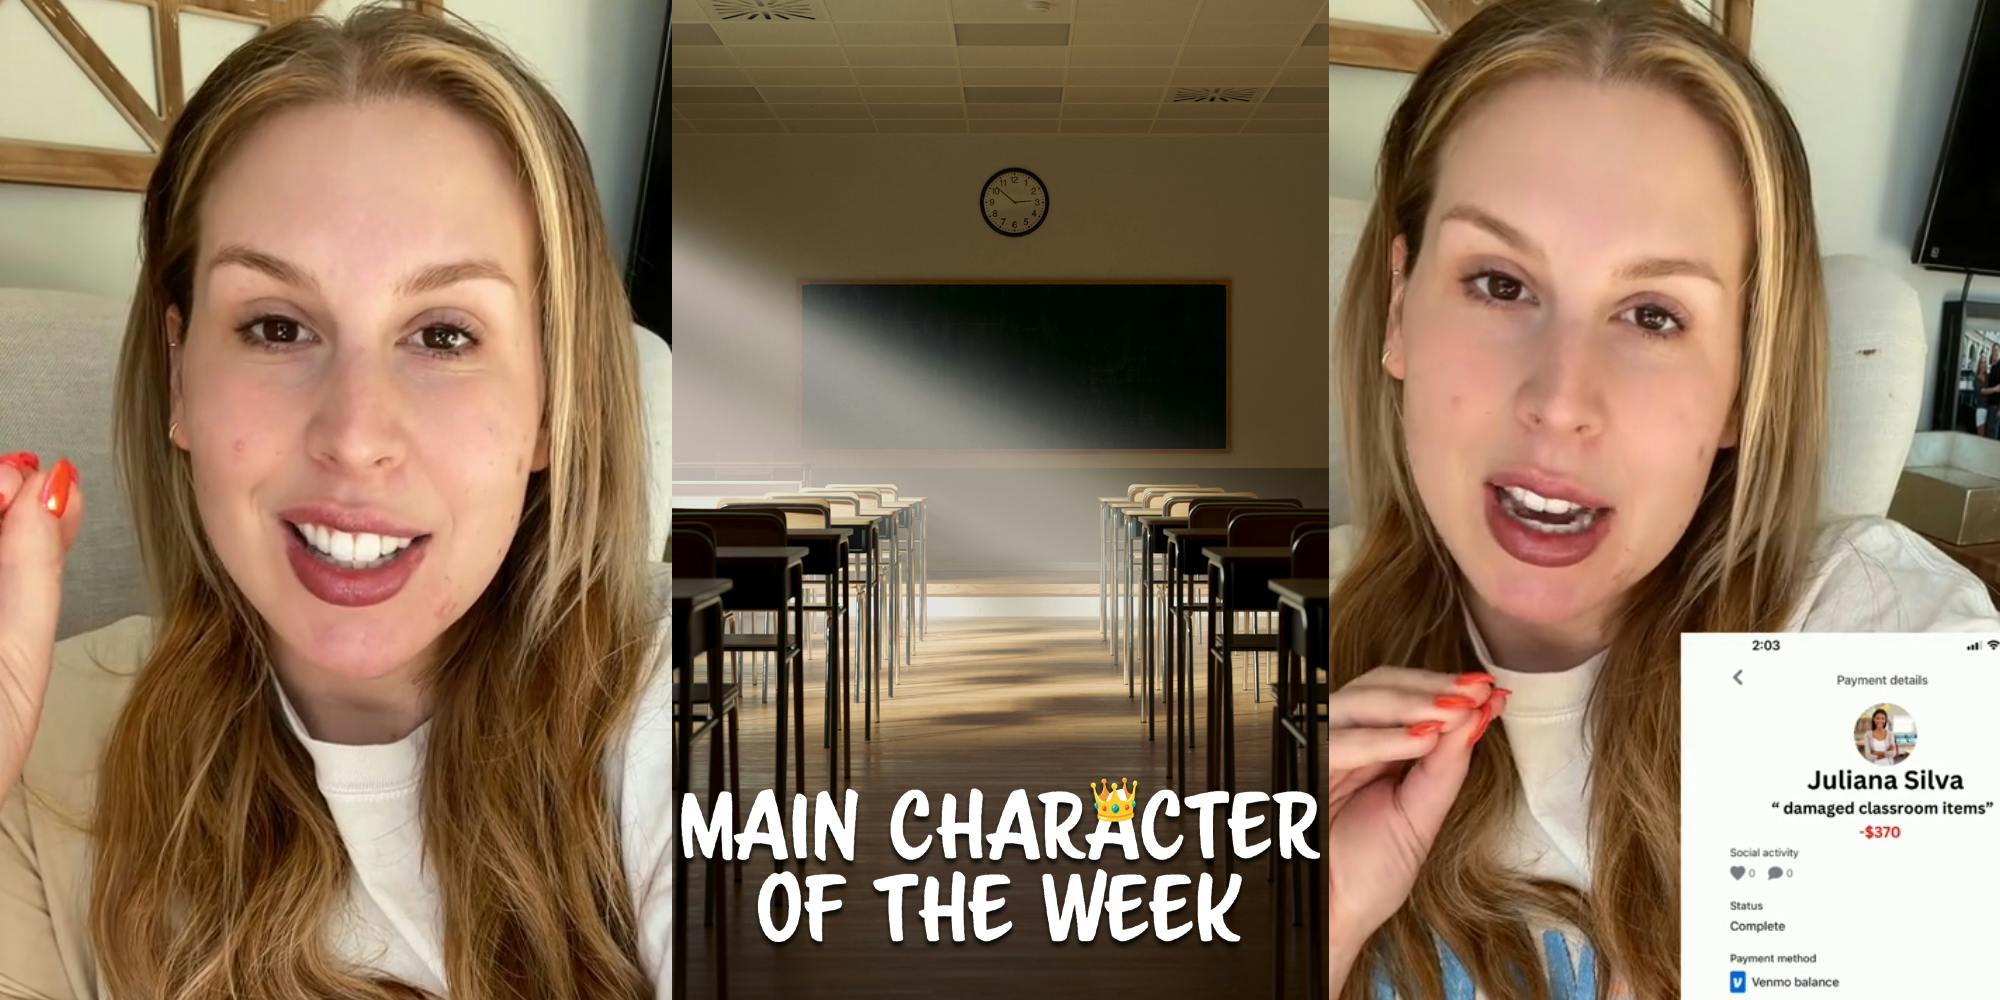 A woman speaking to the camera. In the middle is a classroom. There is text at the bottom that says 'Main Character of the Week' in a Daily Dot newsletter web_crawlr font.